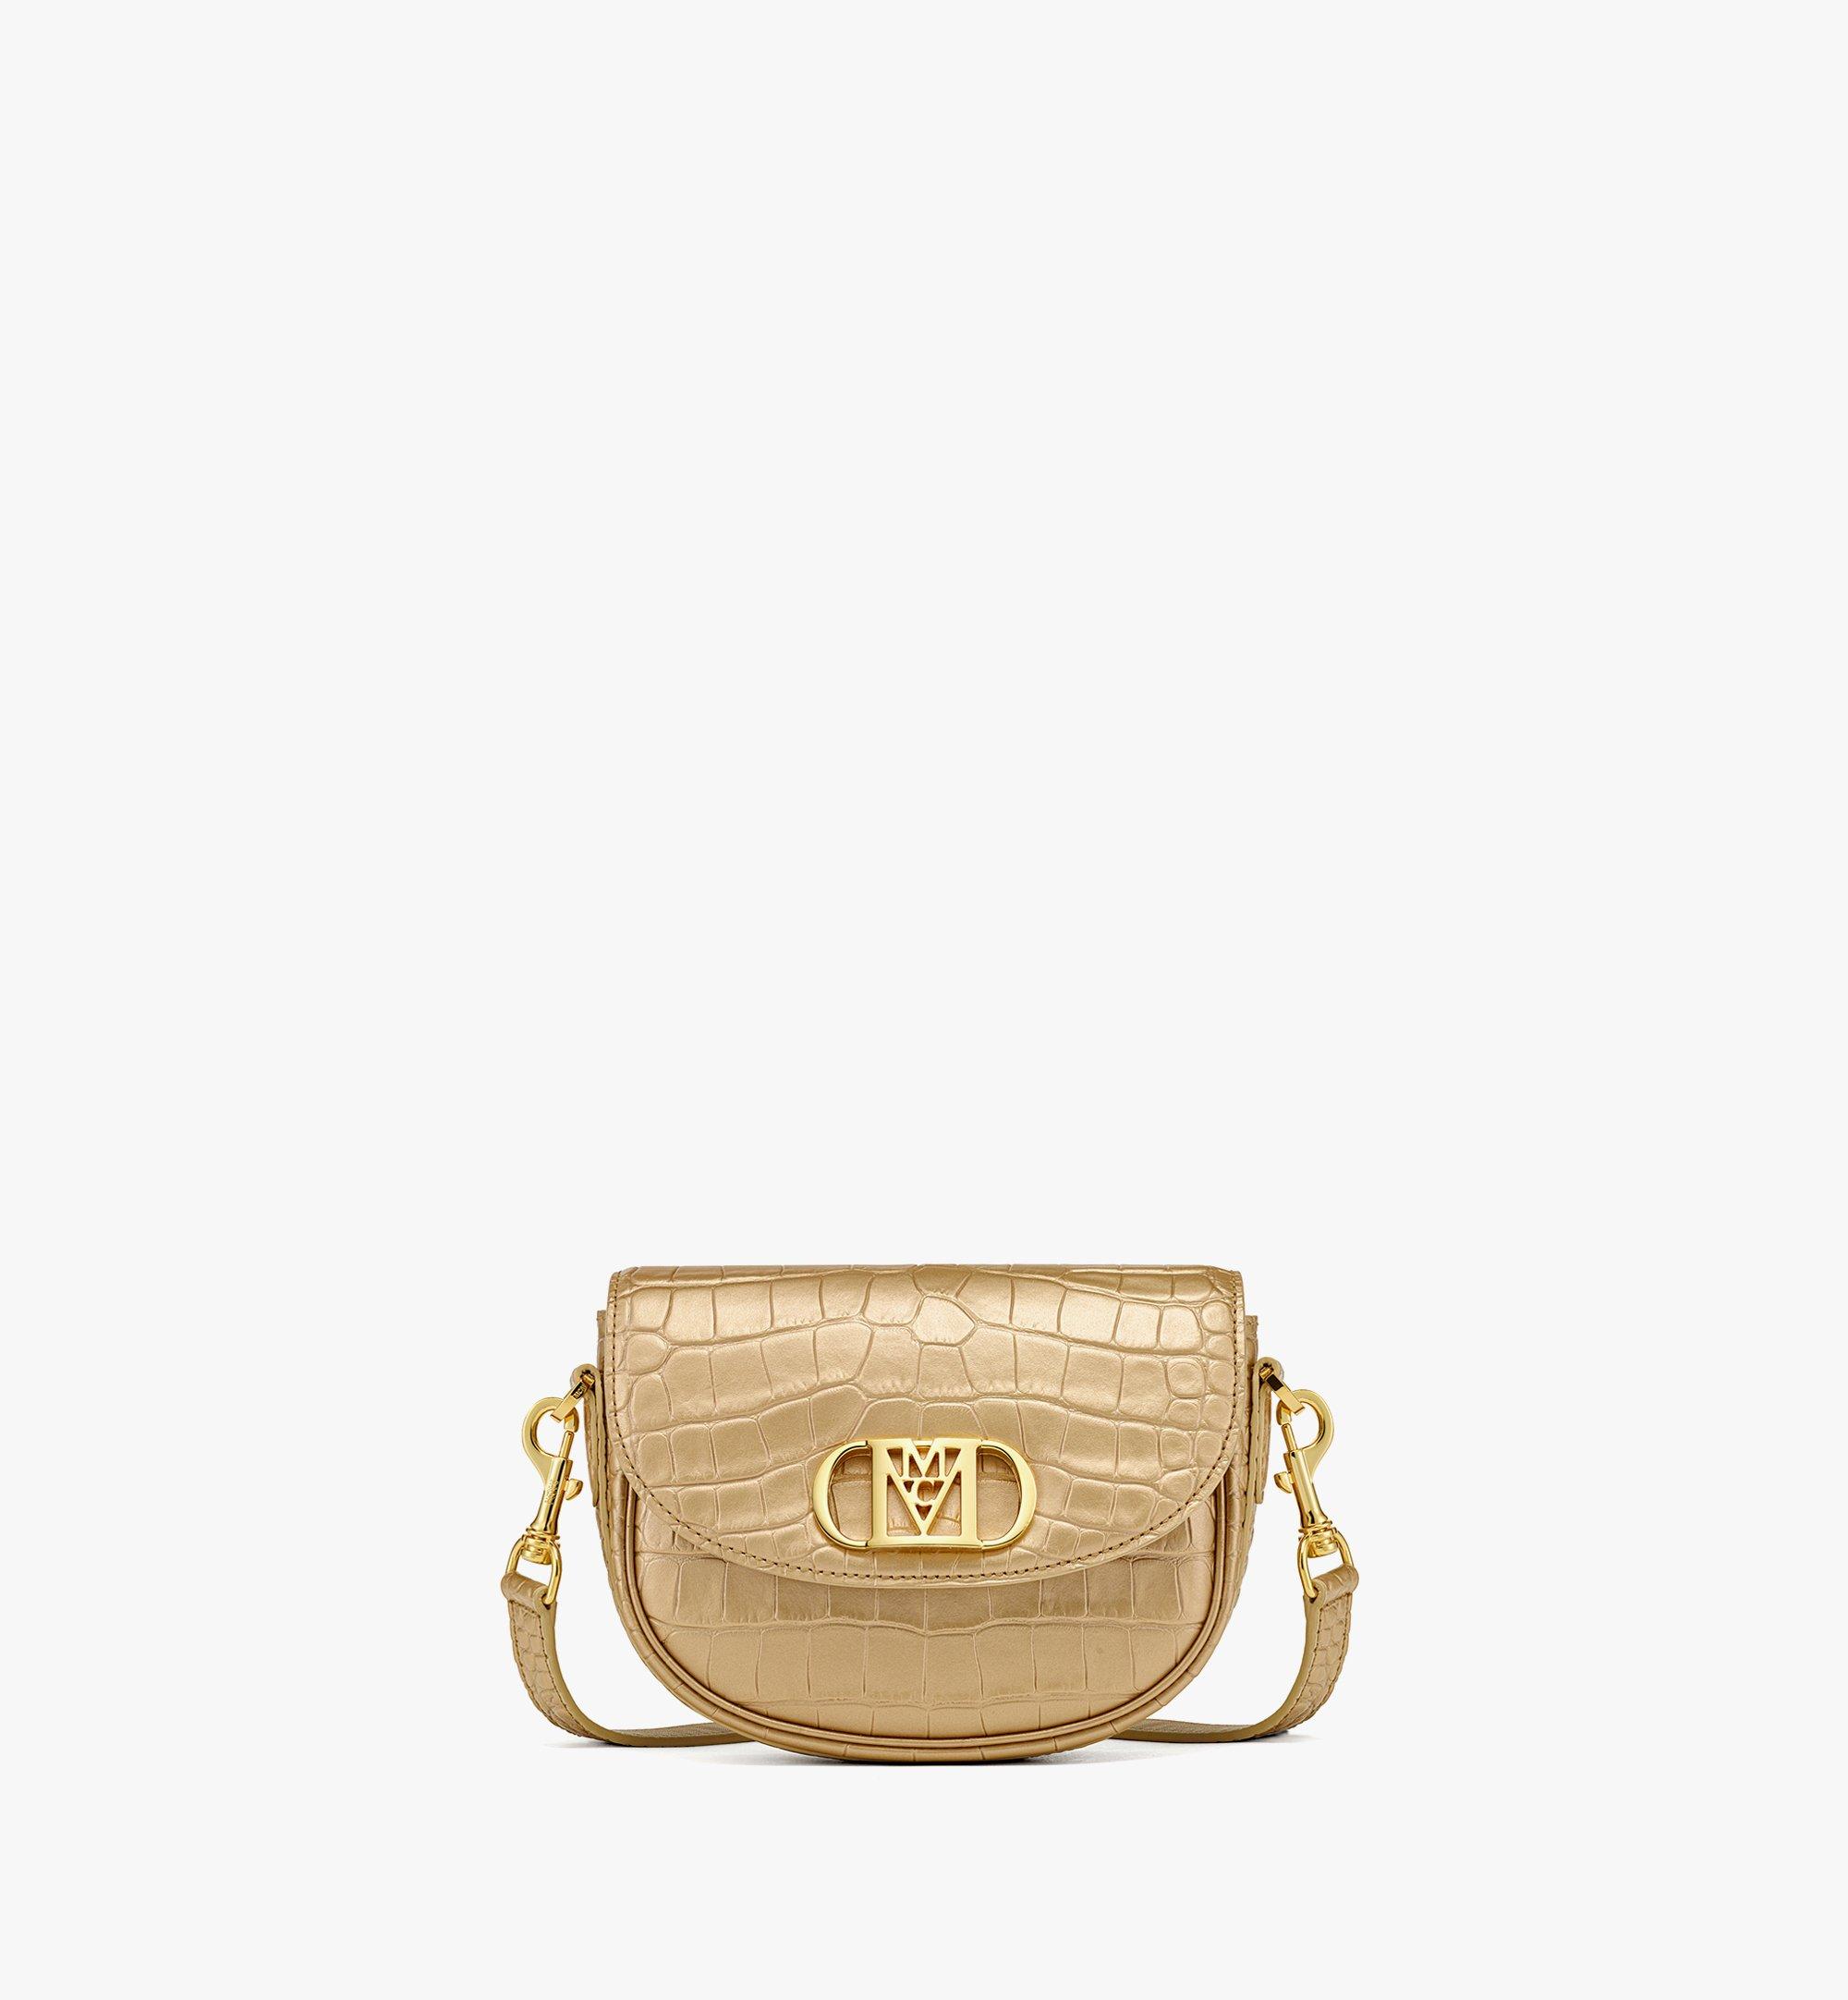 MCM Mode Travia Crossbody in Gold Croco-Embossed Leather Gold MWRDSLD01DG001 Alternate View 1